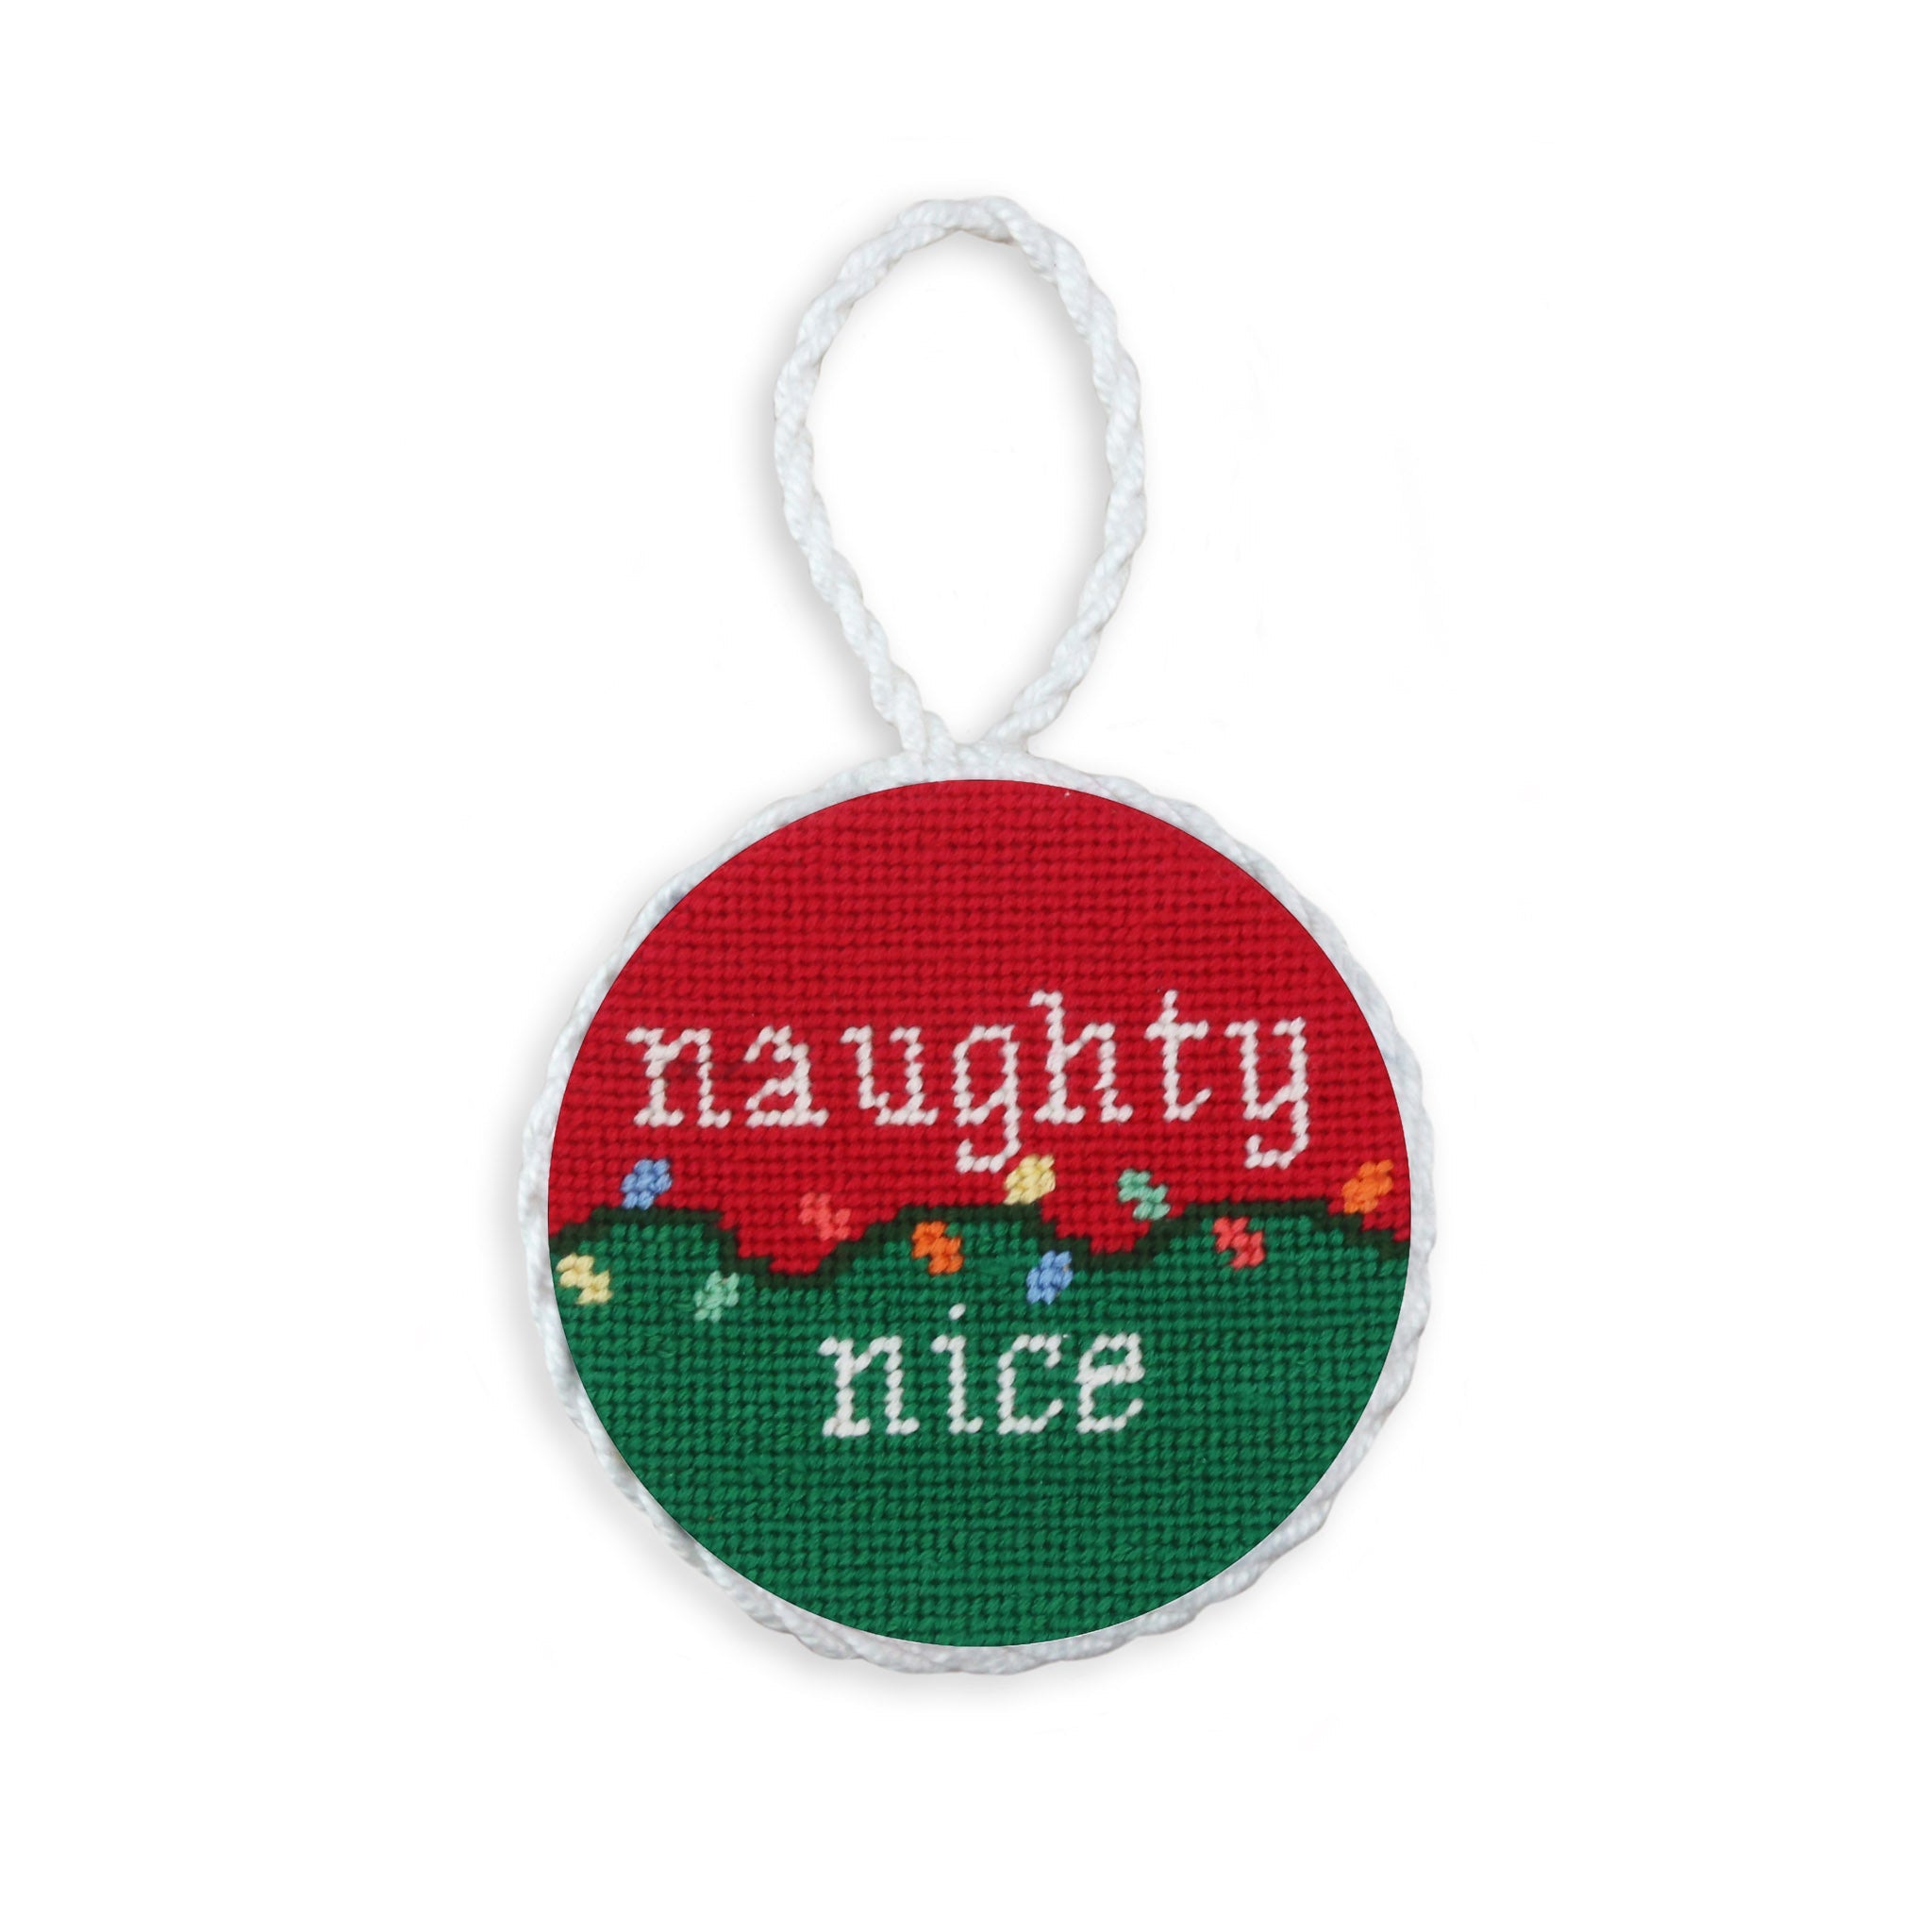 Smathers and Branson Naughty or Nice Needlepoint Ornament White Cord  